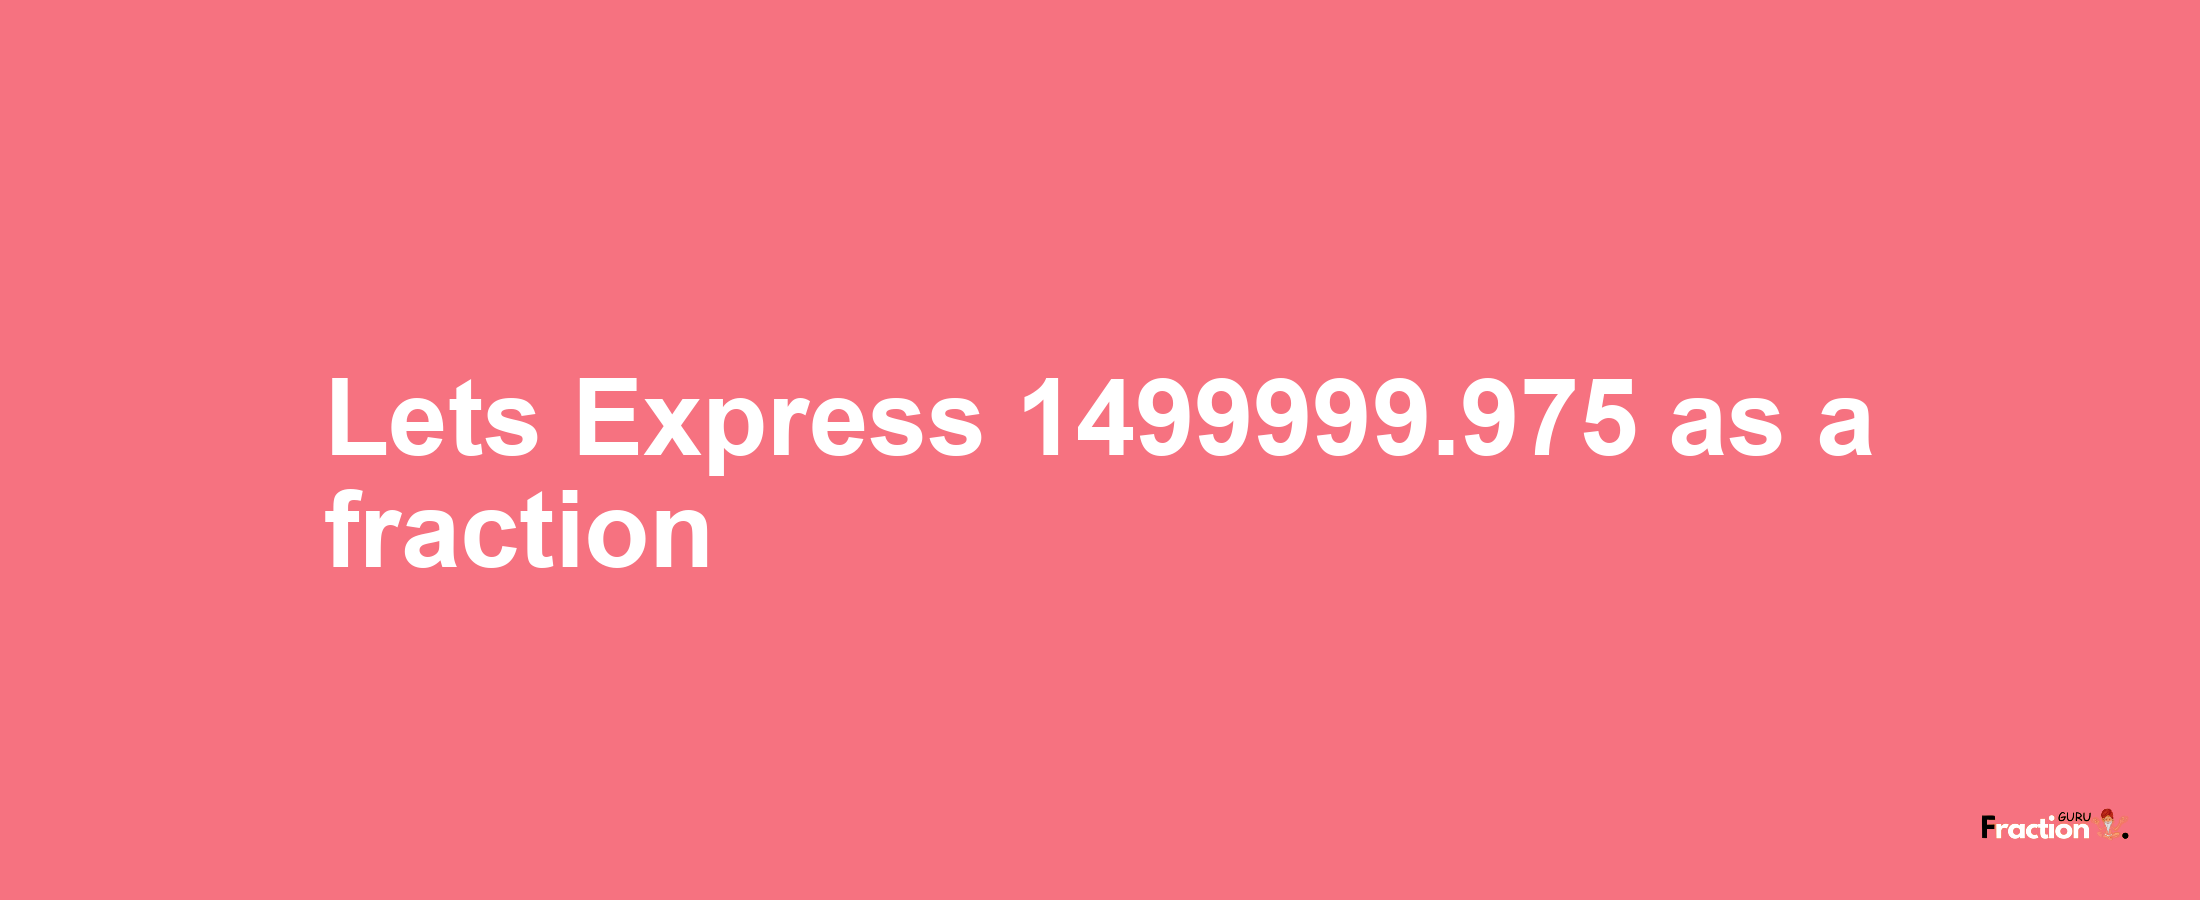 Lets Express 1499999.975 as afraction